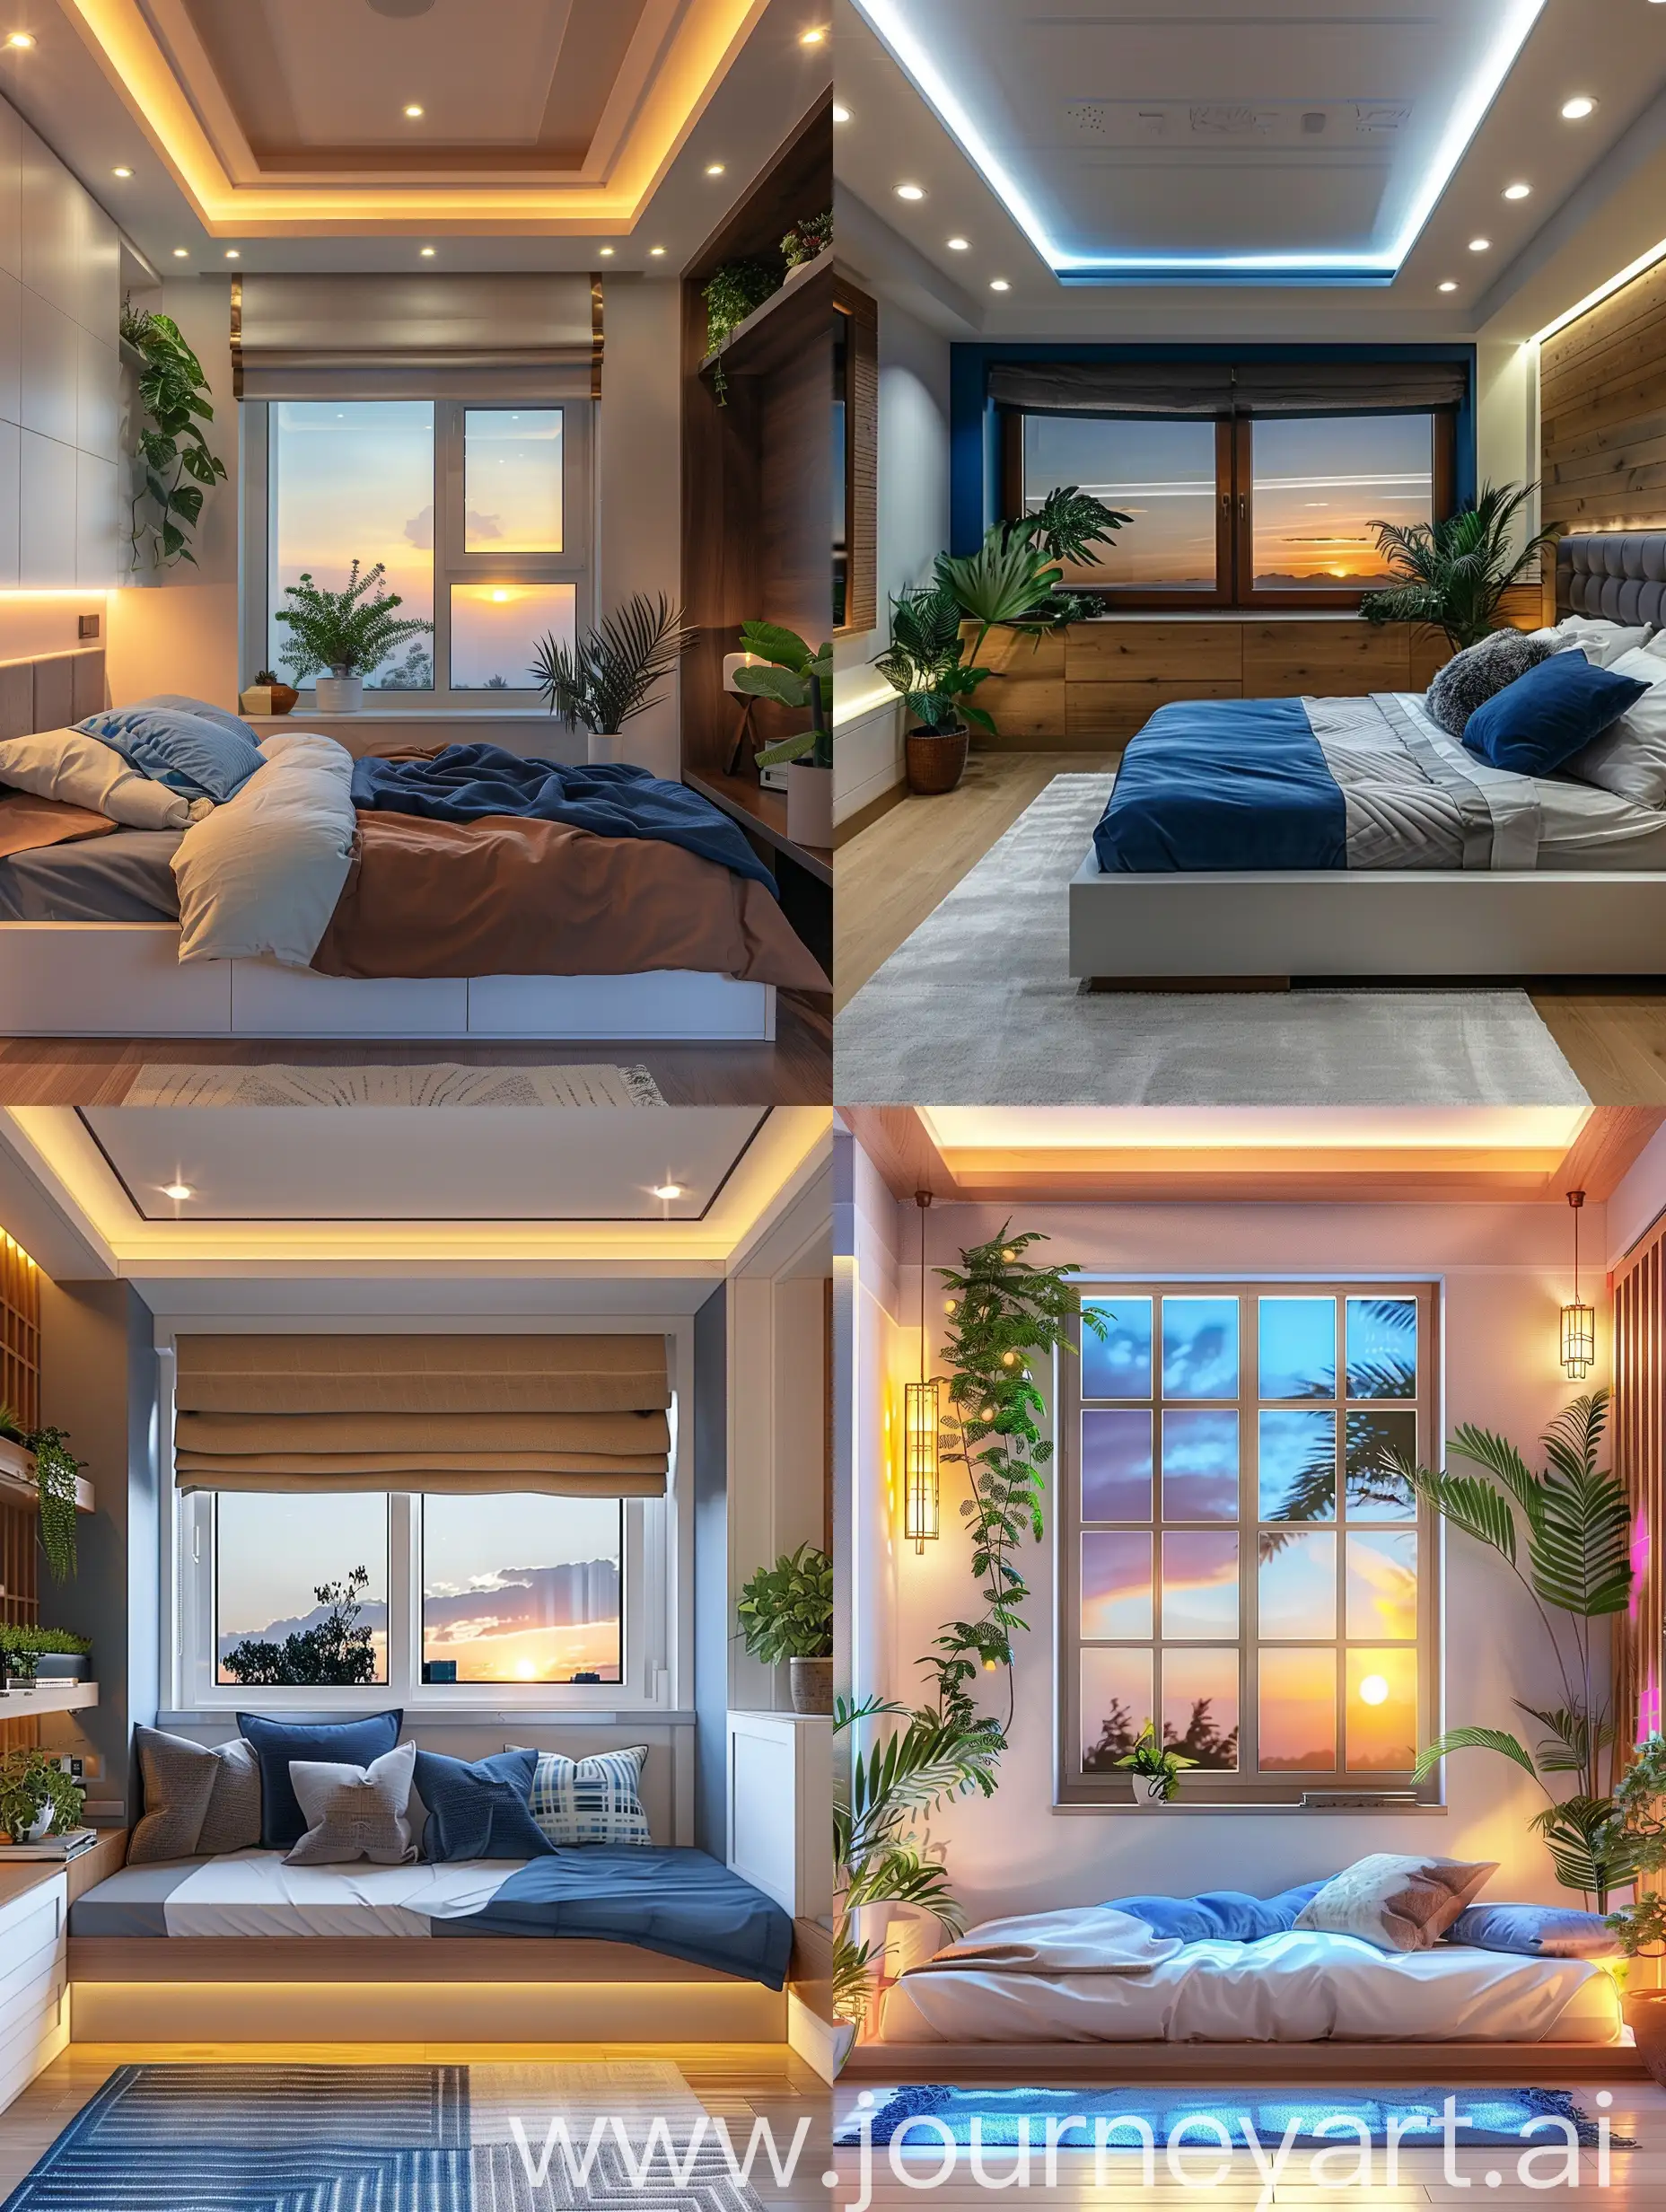 Contemporary-Bedroom-Interior-with-Sunset-Views-and-Potted-Plants